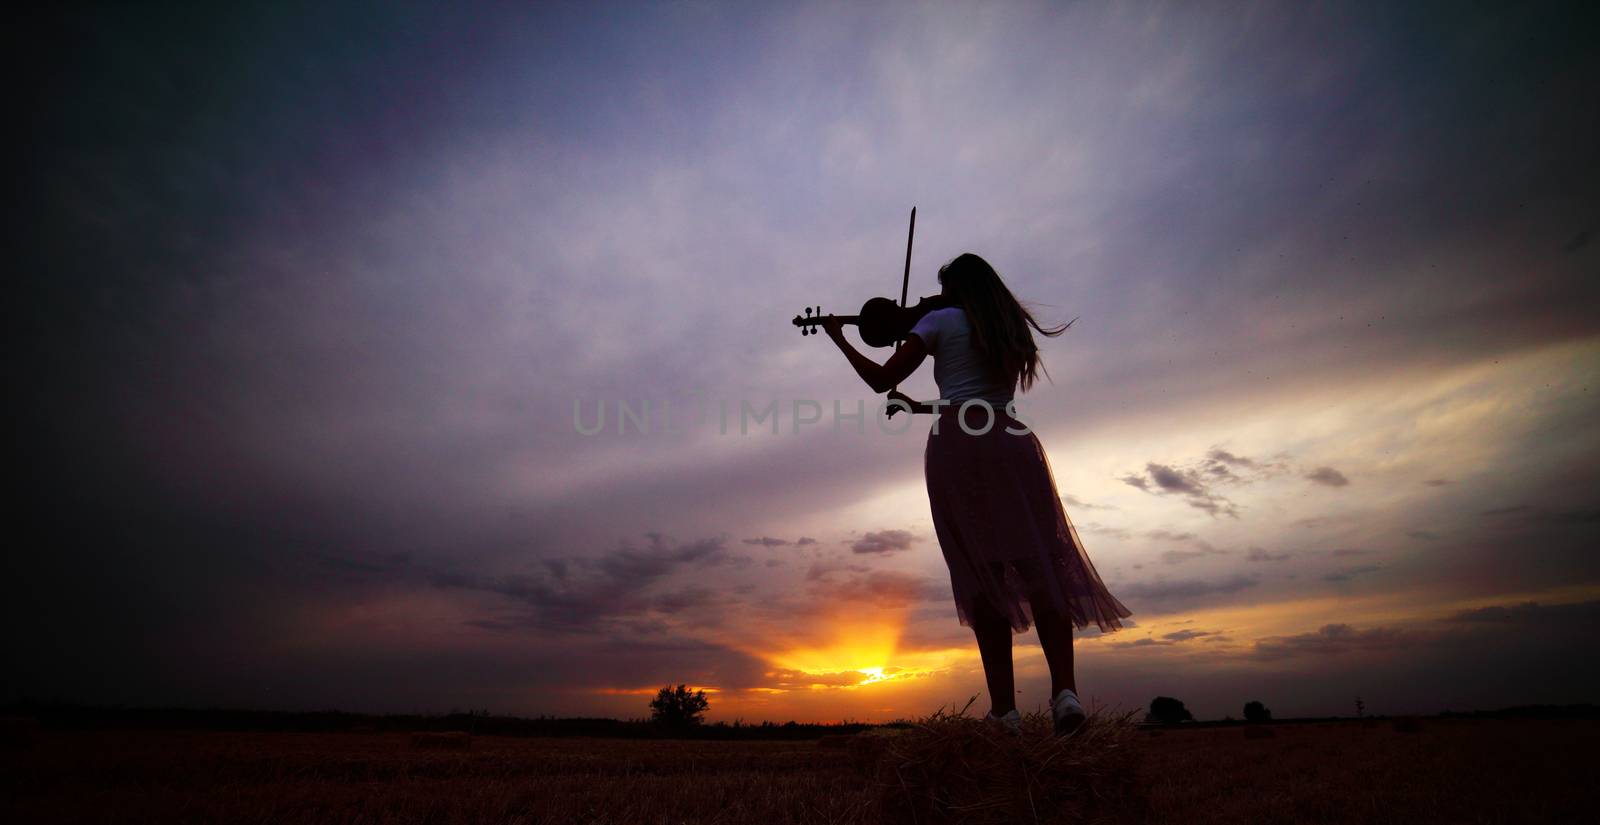 Romantic young woman with loose hair playing the violin in a field at sunset by selinsmo